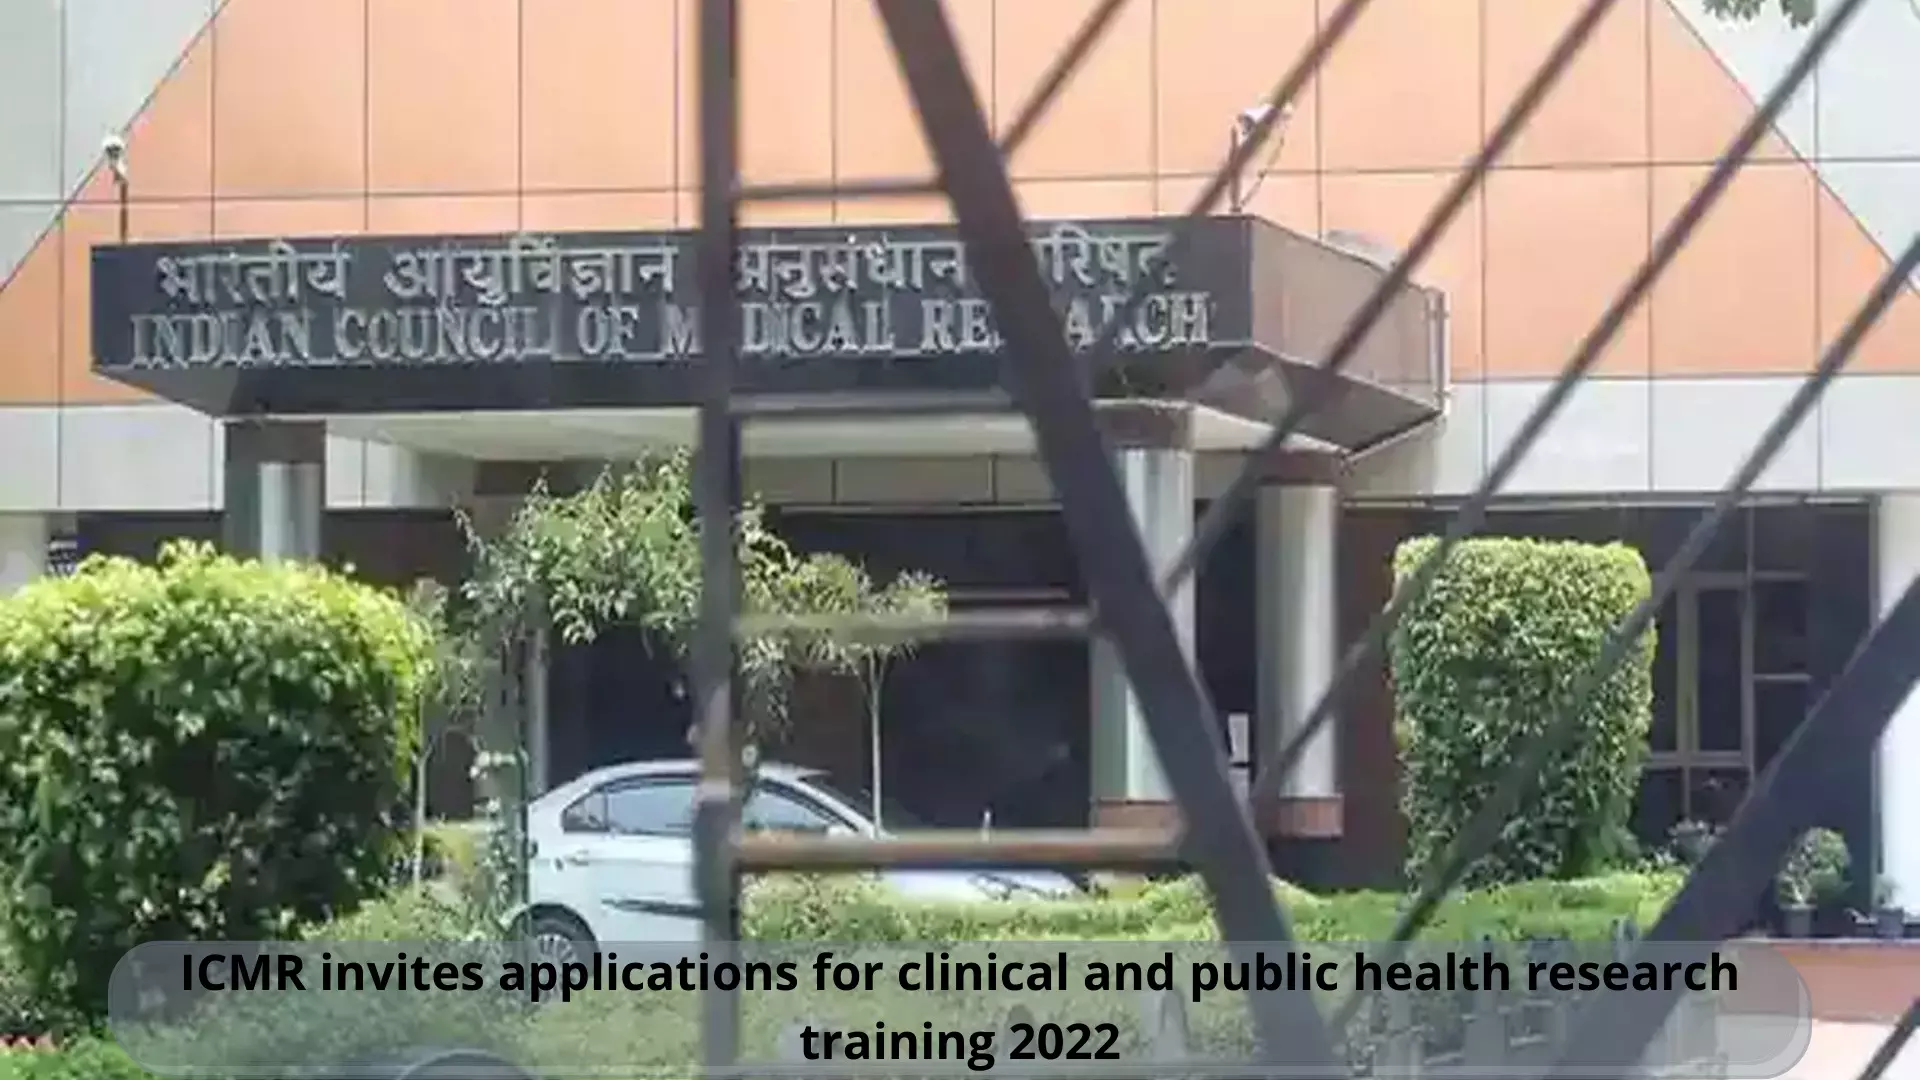 ICMR invites applications for clinical and public health research training 2022